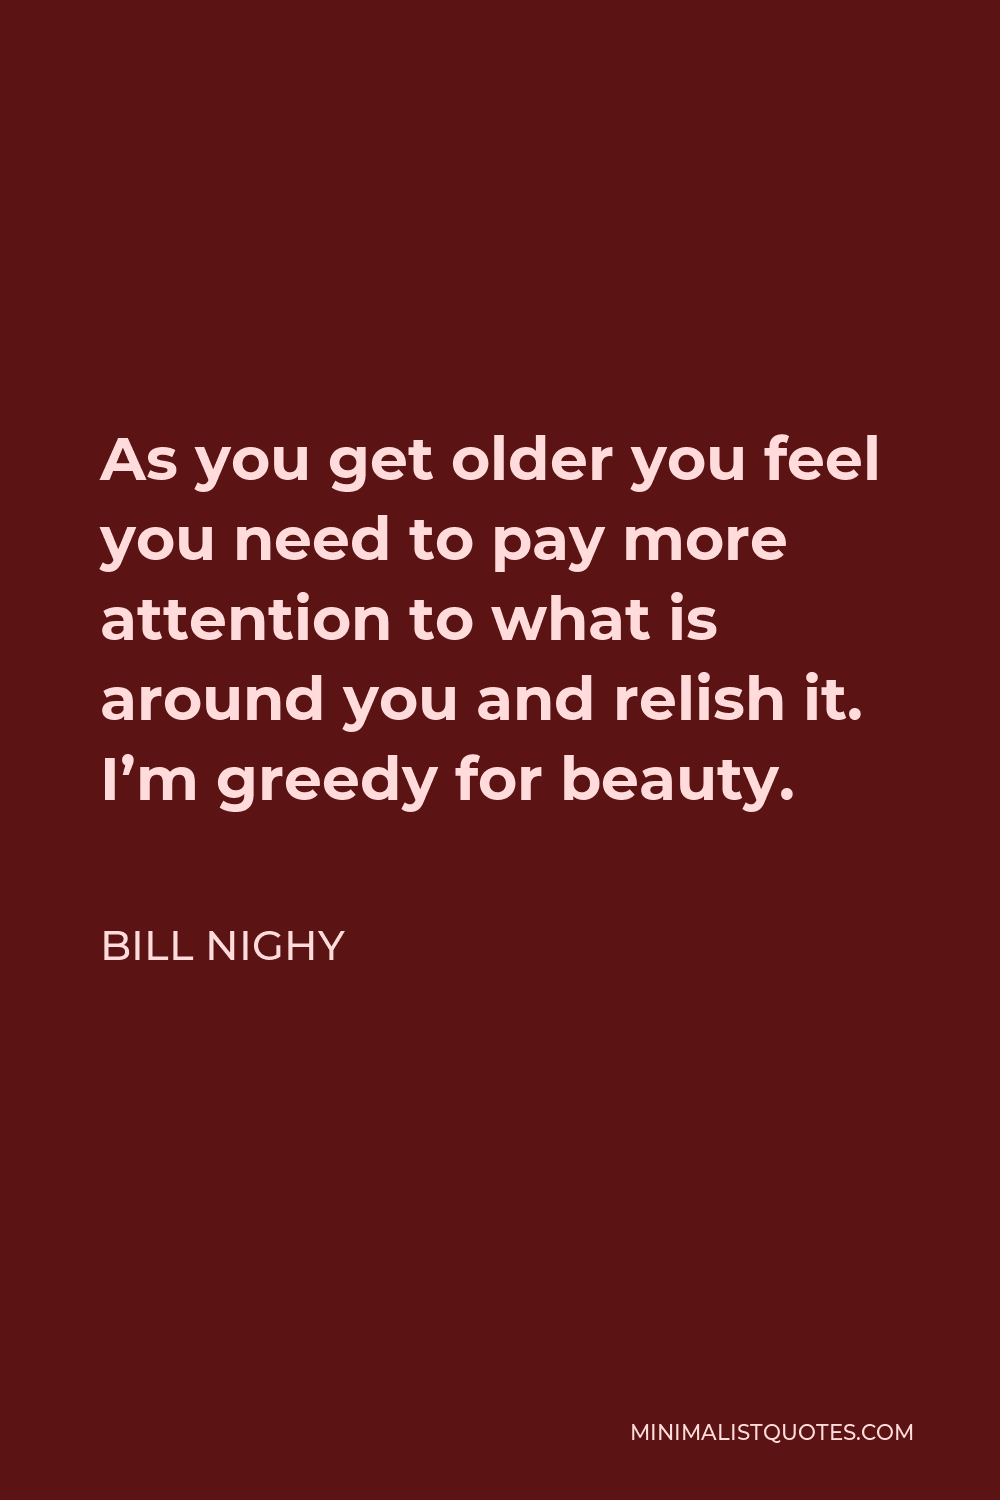 Bill Nighy Quote - As you get older you feel you need to pay more attention to what is around you and relish it. I’m greedy for beauty.